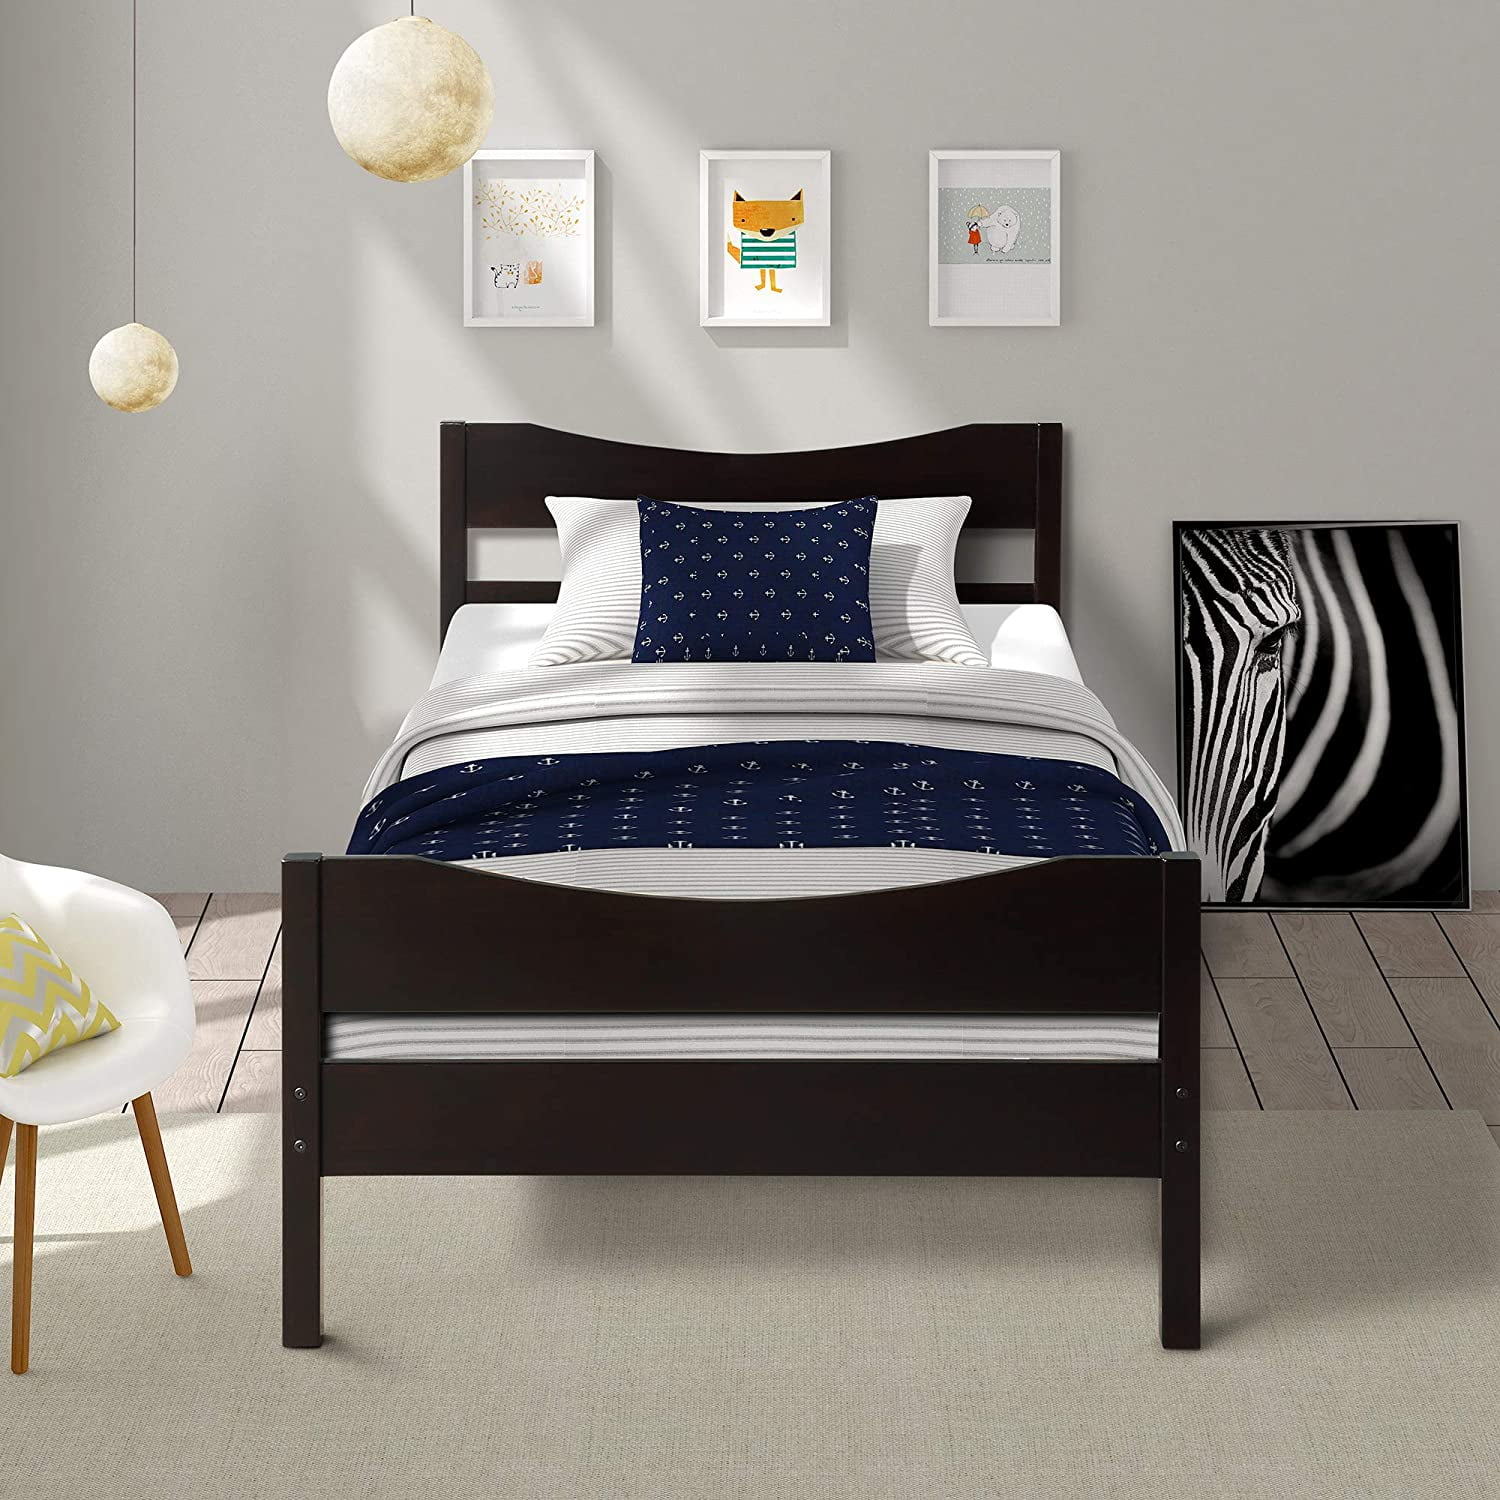 Platform Bed Frame with Headboard and Footboard, Twin Bed Frames for Kids, Heavy Duty Pine Wood Twin Bed Frame, Modern Twin Size Bedroom Furniture with Wood Slats Support, No Box Spring Needed, Q12887